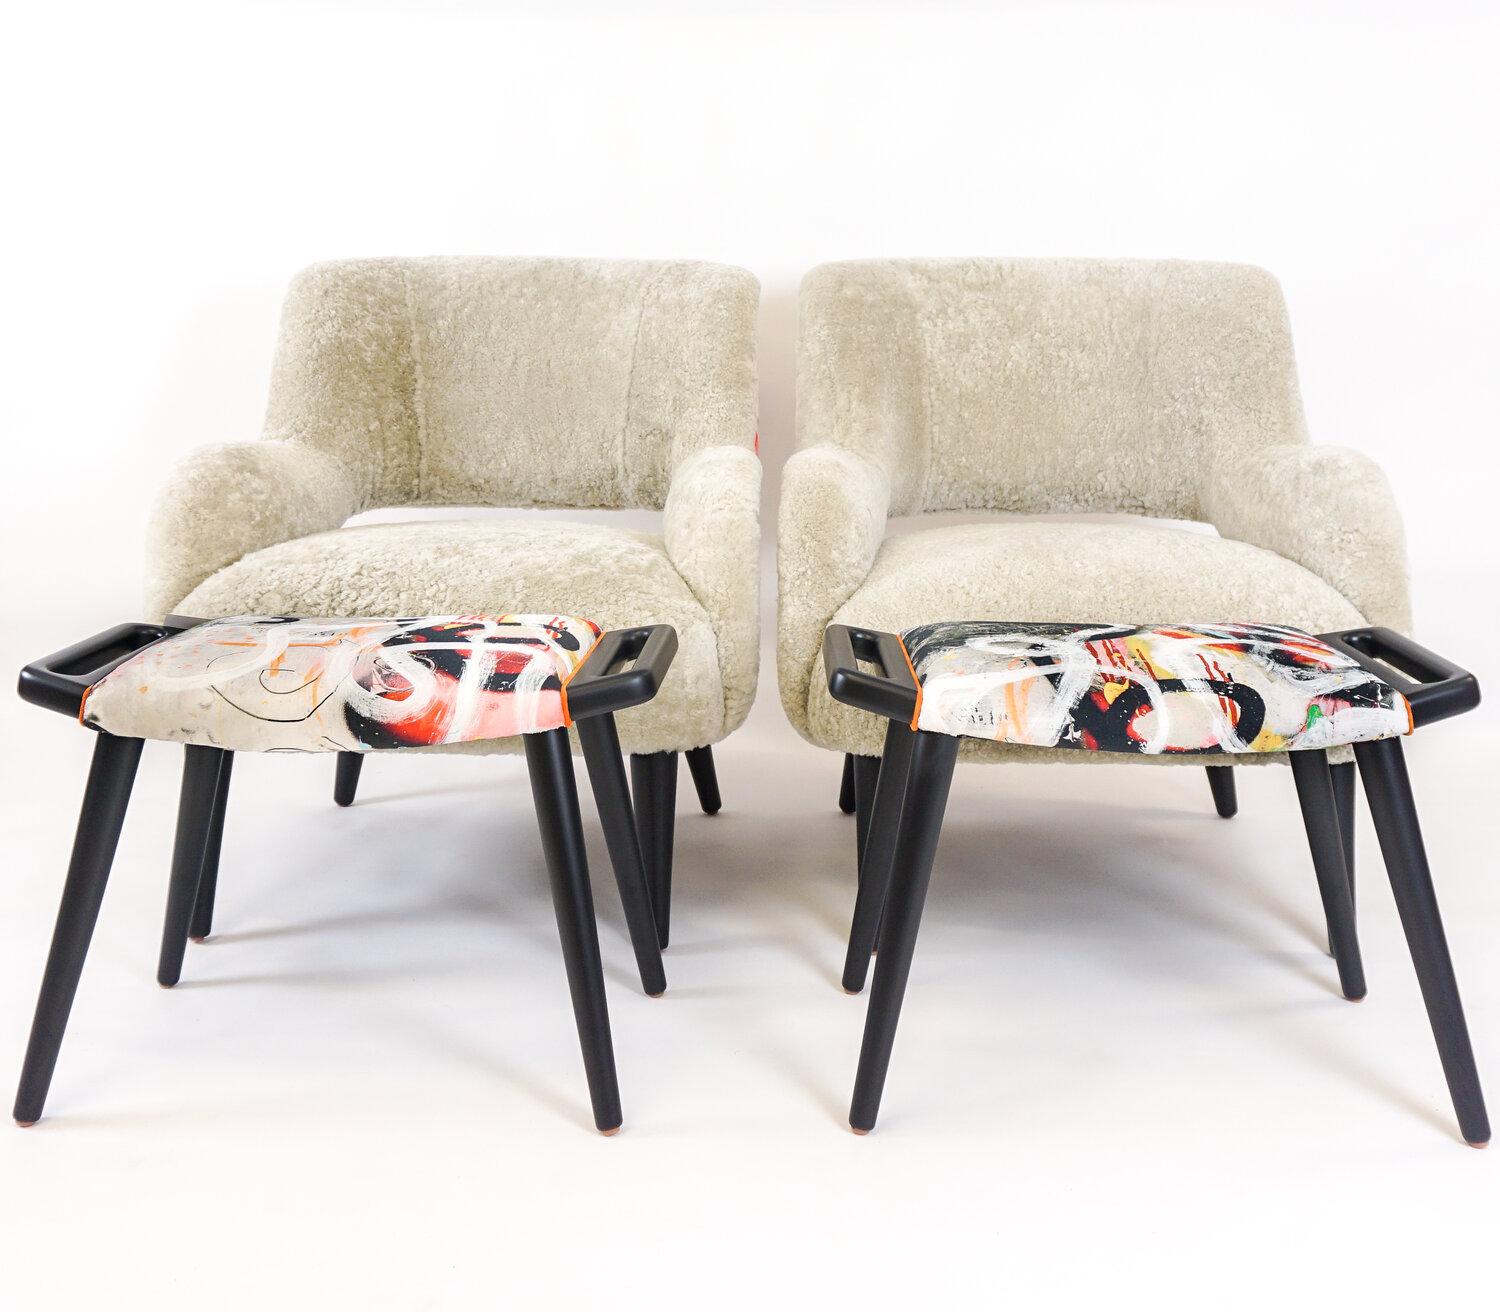 Maple Modern Tight Seat Club Chair in Shearling and Graffiti Print and Lacquer Legs For Sale